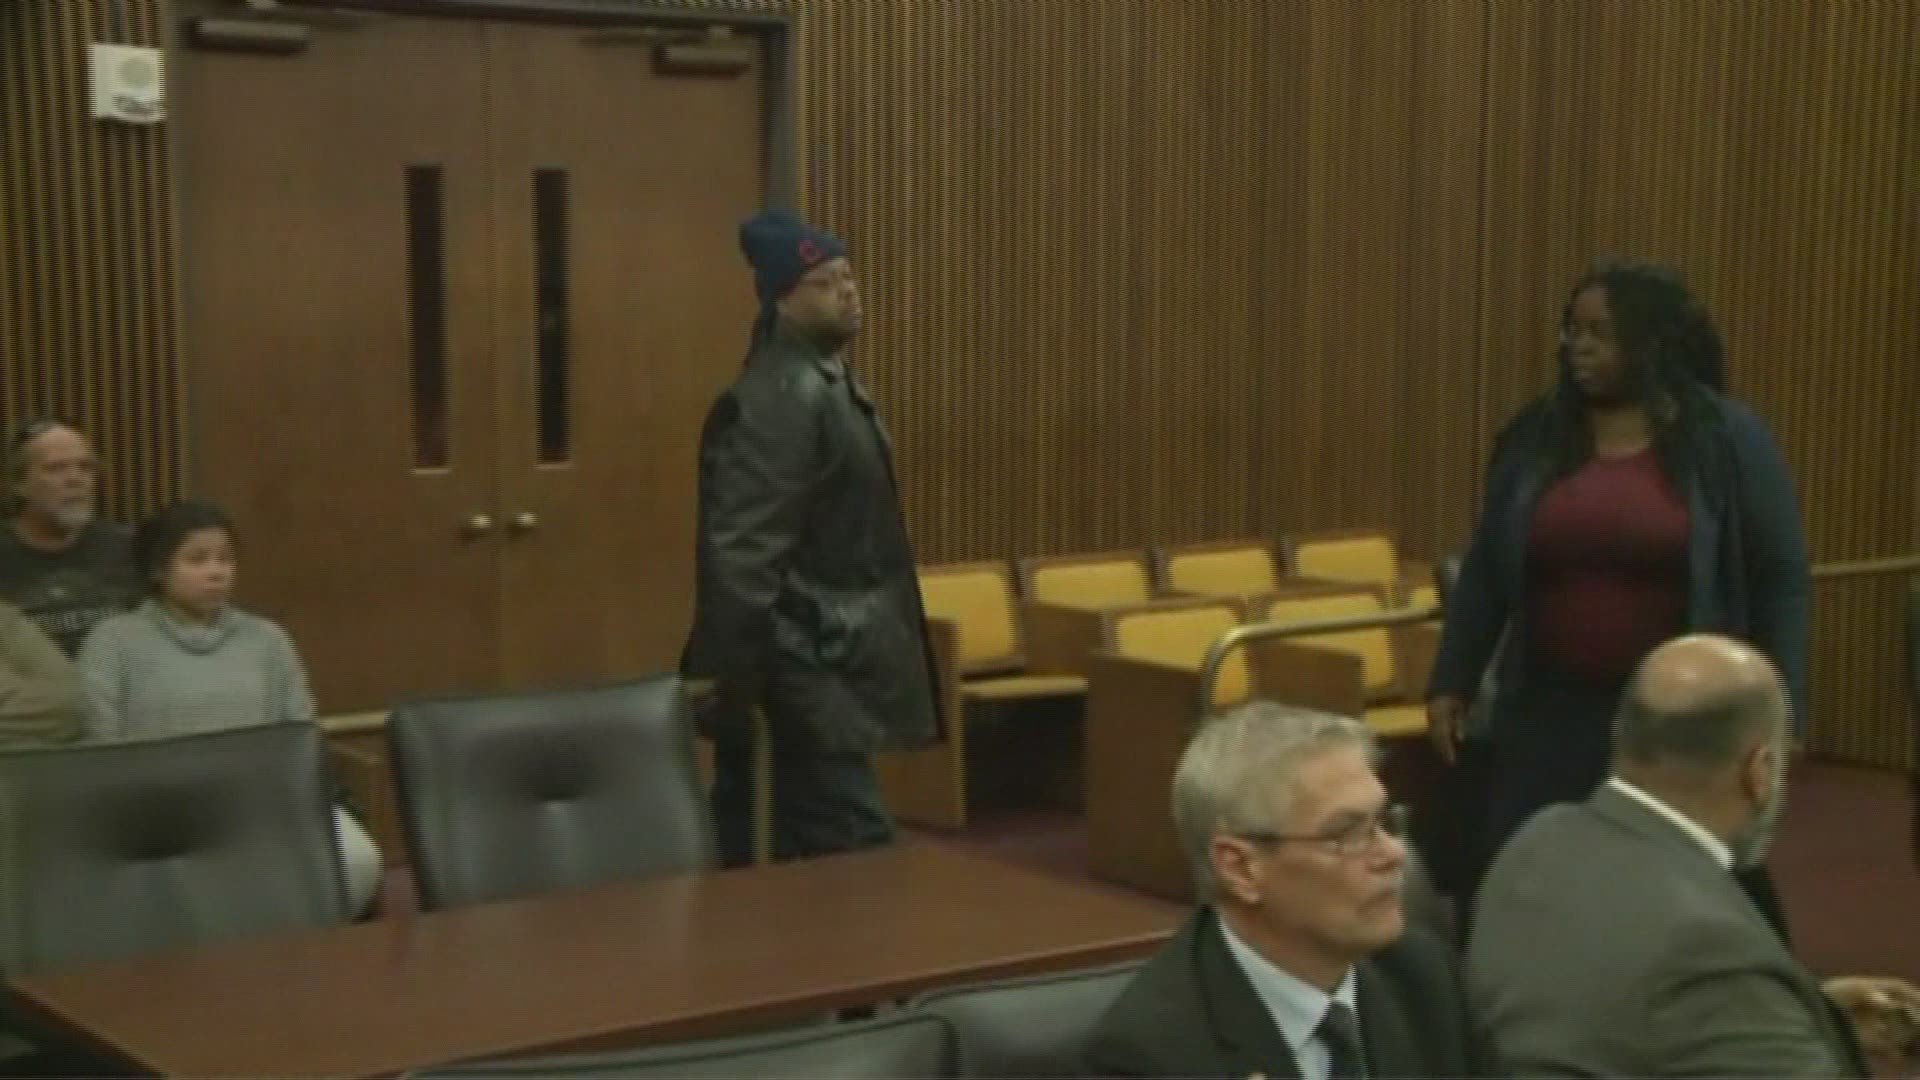 Relatives of the victims killed by Cleveland serial killer Robert Rembert, Jr. addressed the court at his sentencing.